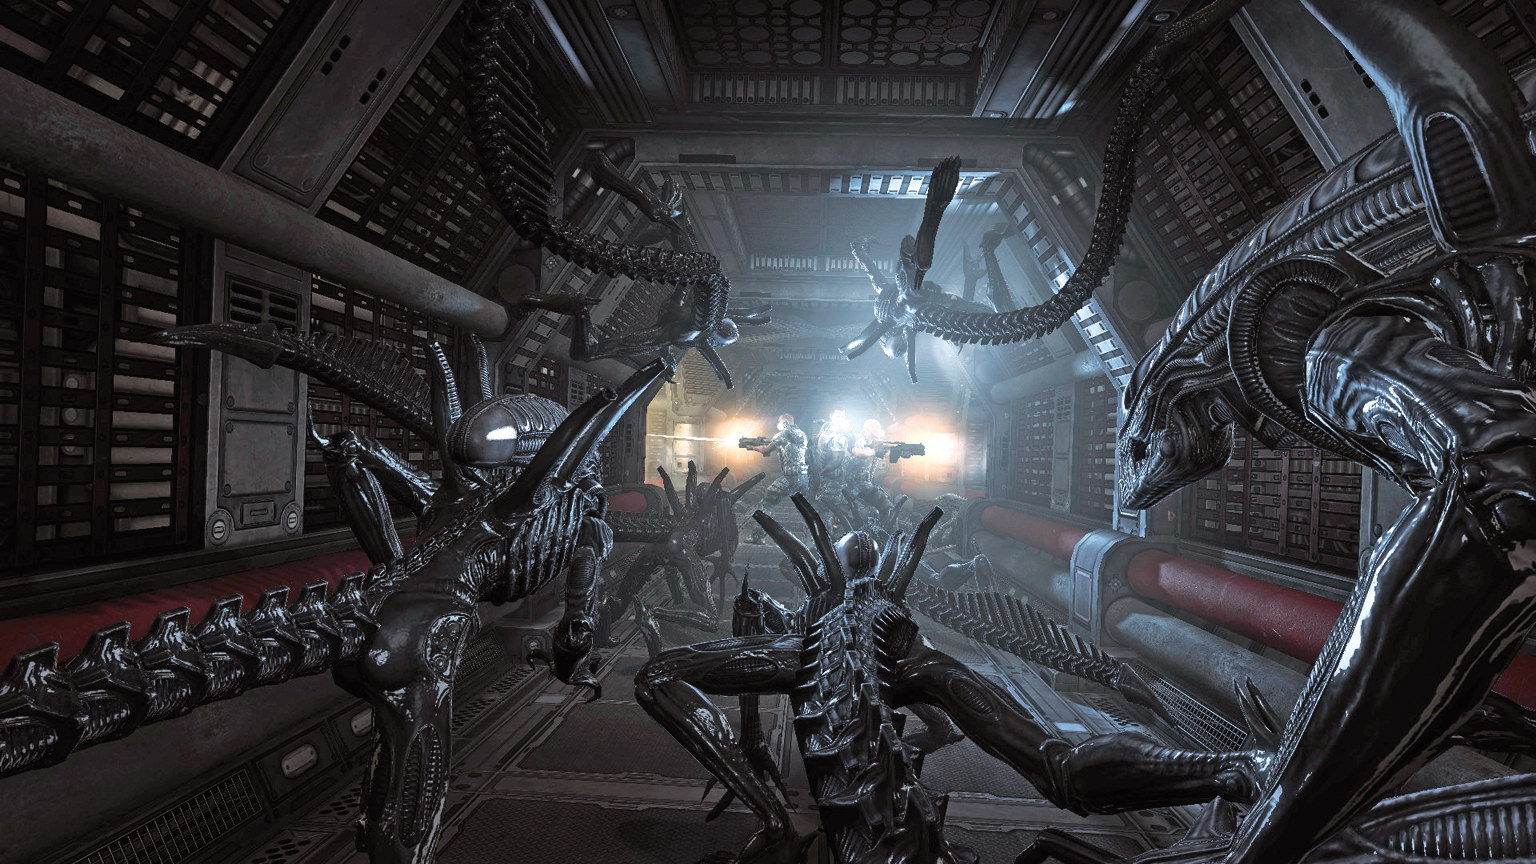 Exclusive] AvP PC System Requirements Revealed - Alien vs. Predator Galaxy